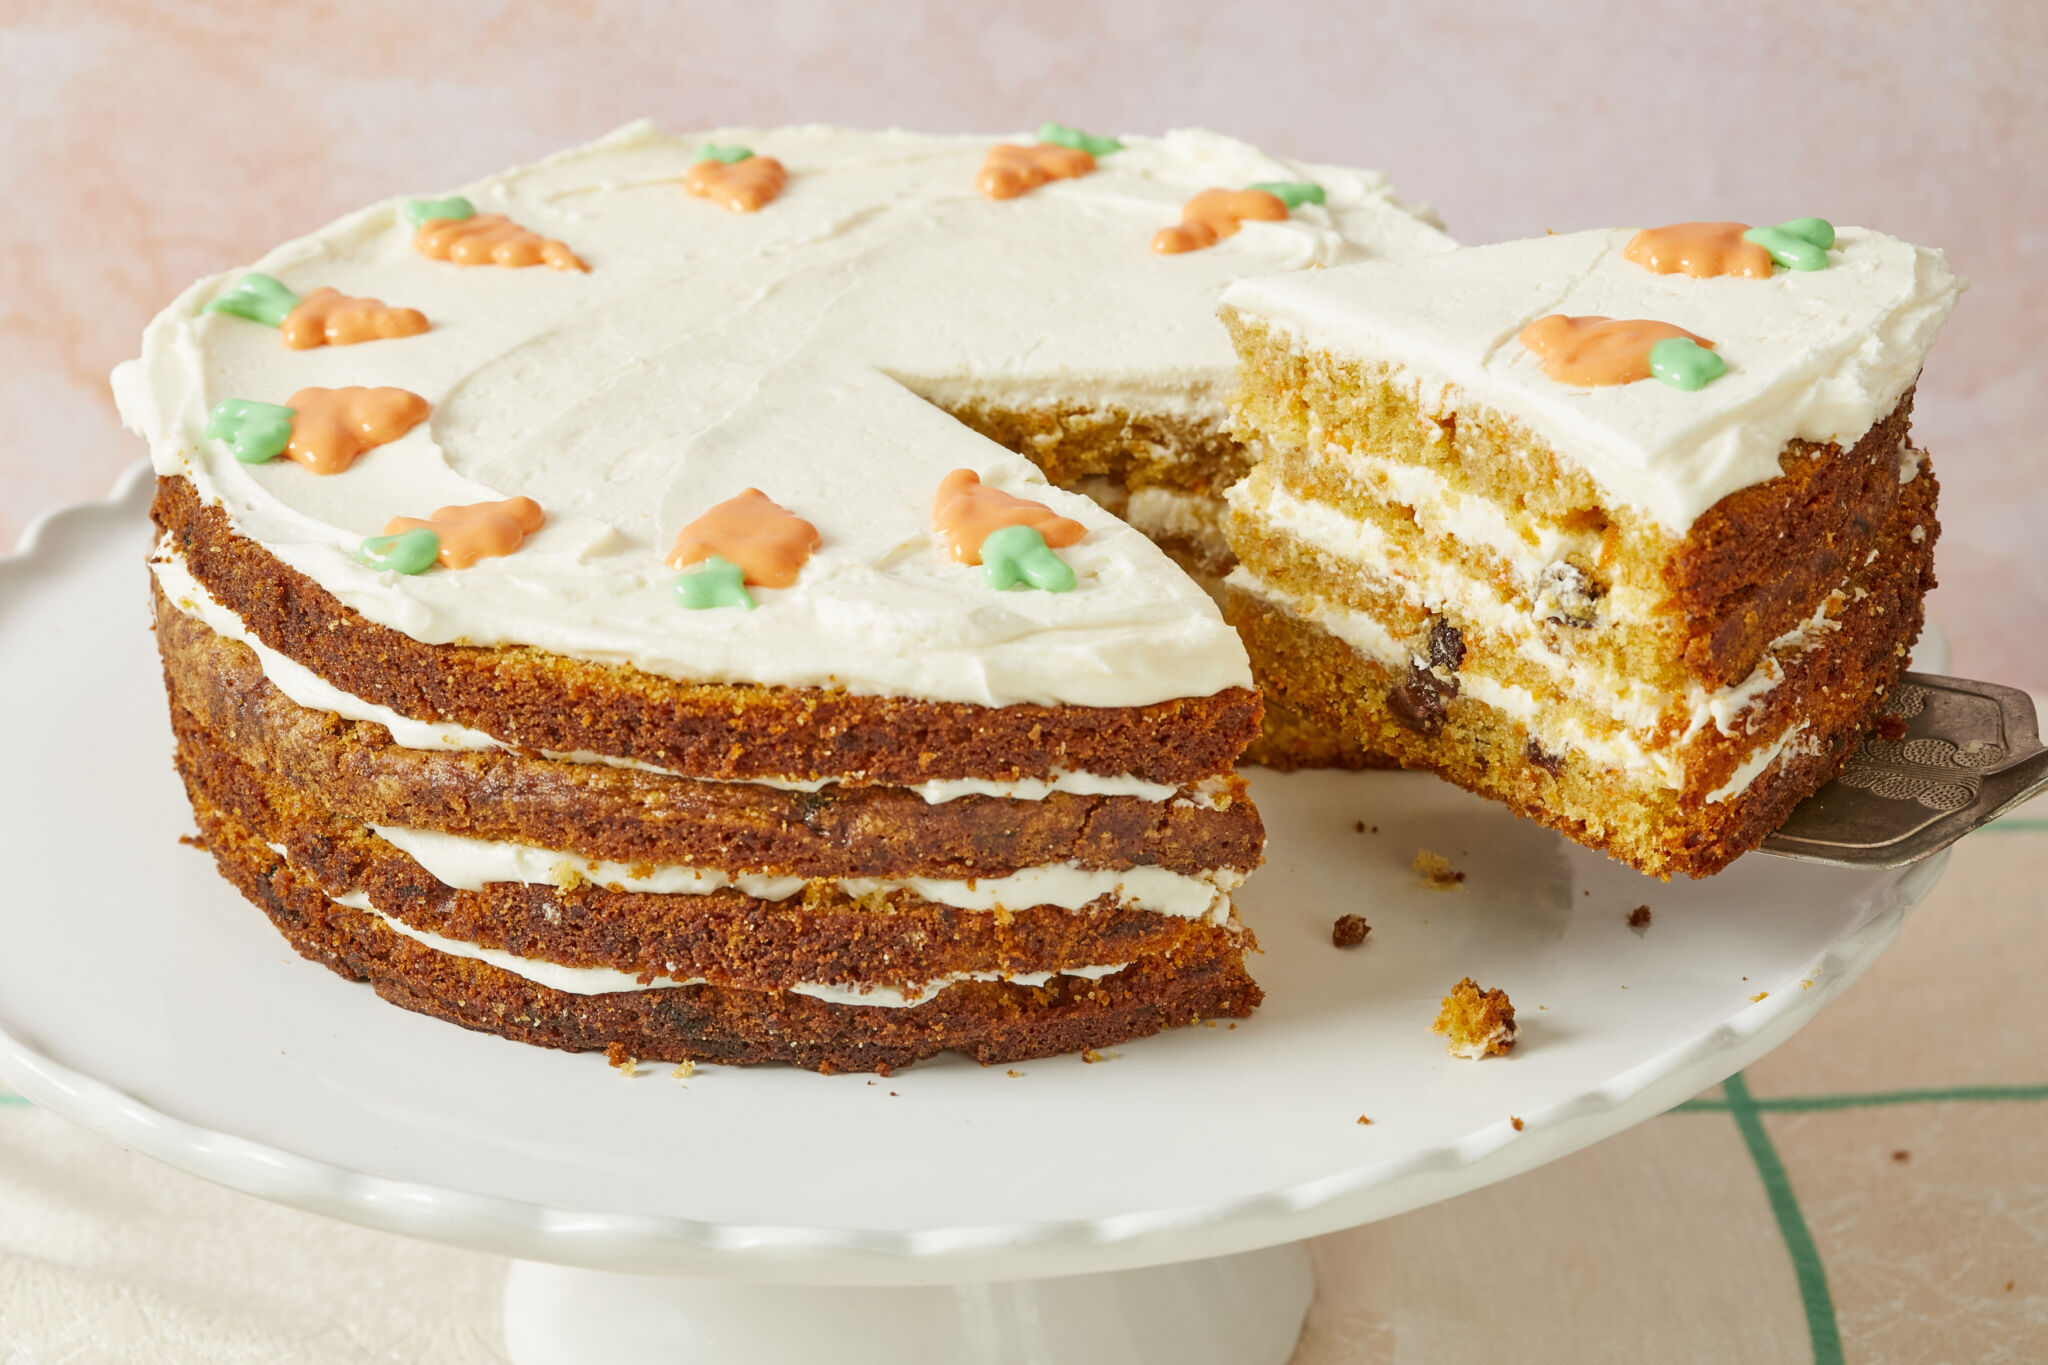 Best Ever Carrot Cake with raisins and Best Ever Cream Cheese Frosting